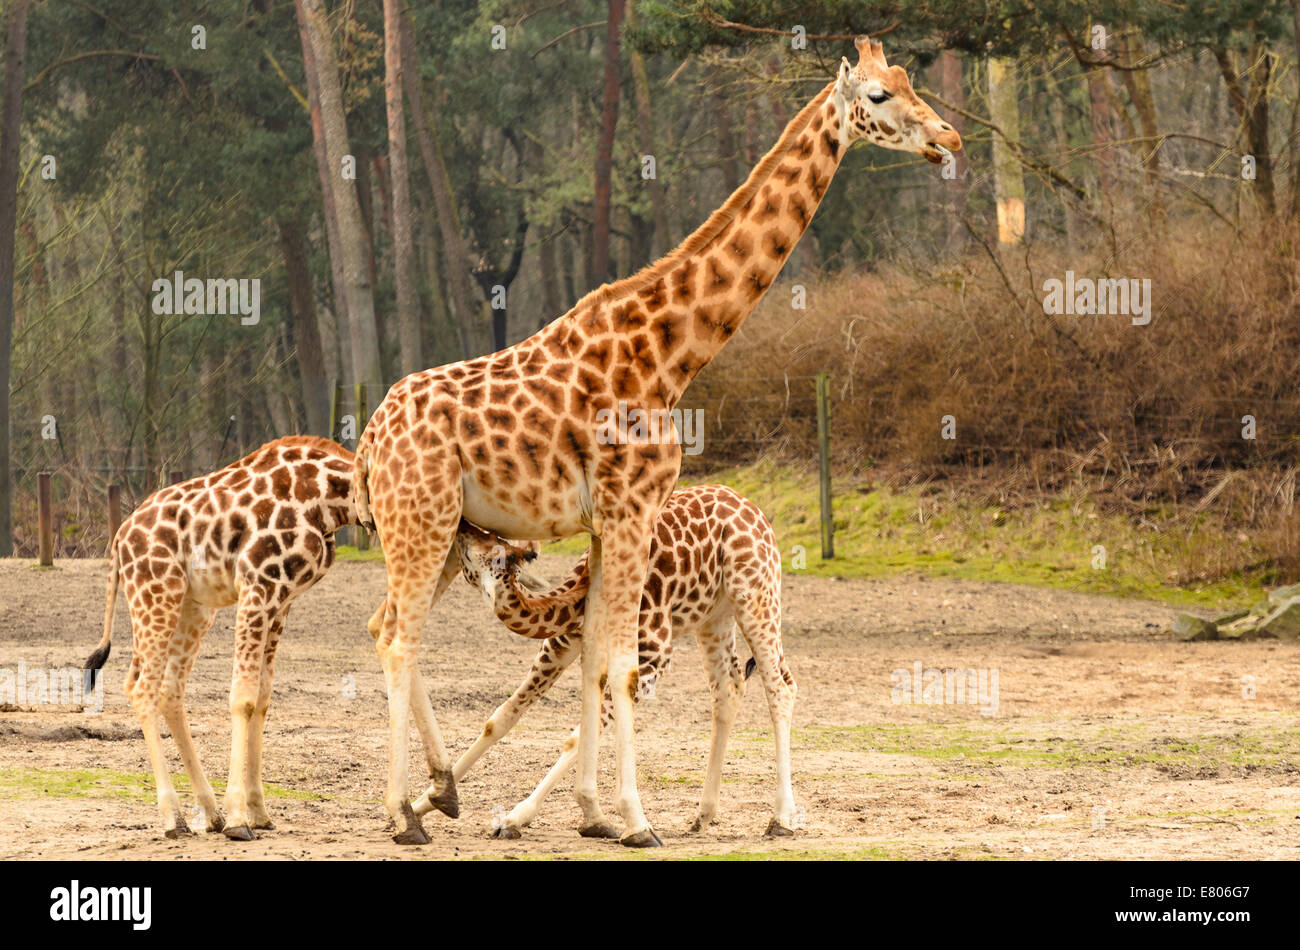 Two young giraffe at the zoo drinking from the mother giraffe. Stock Photo